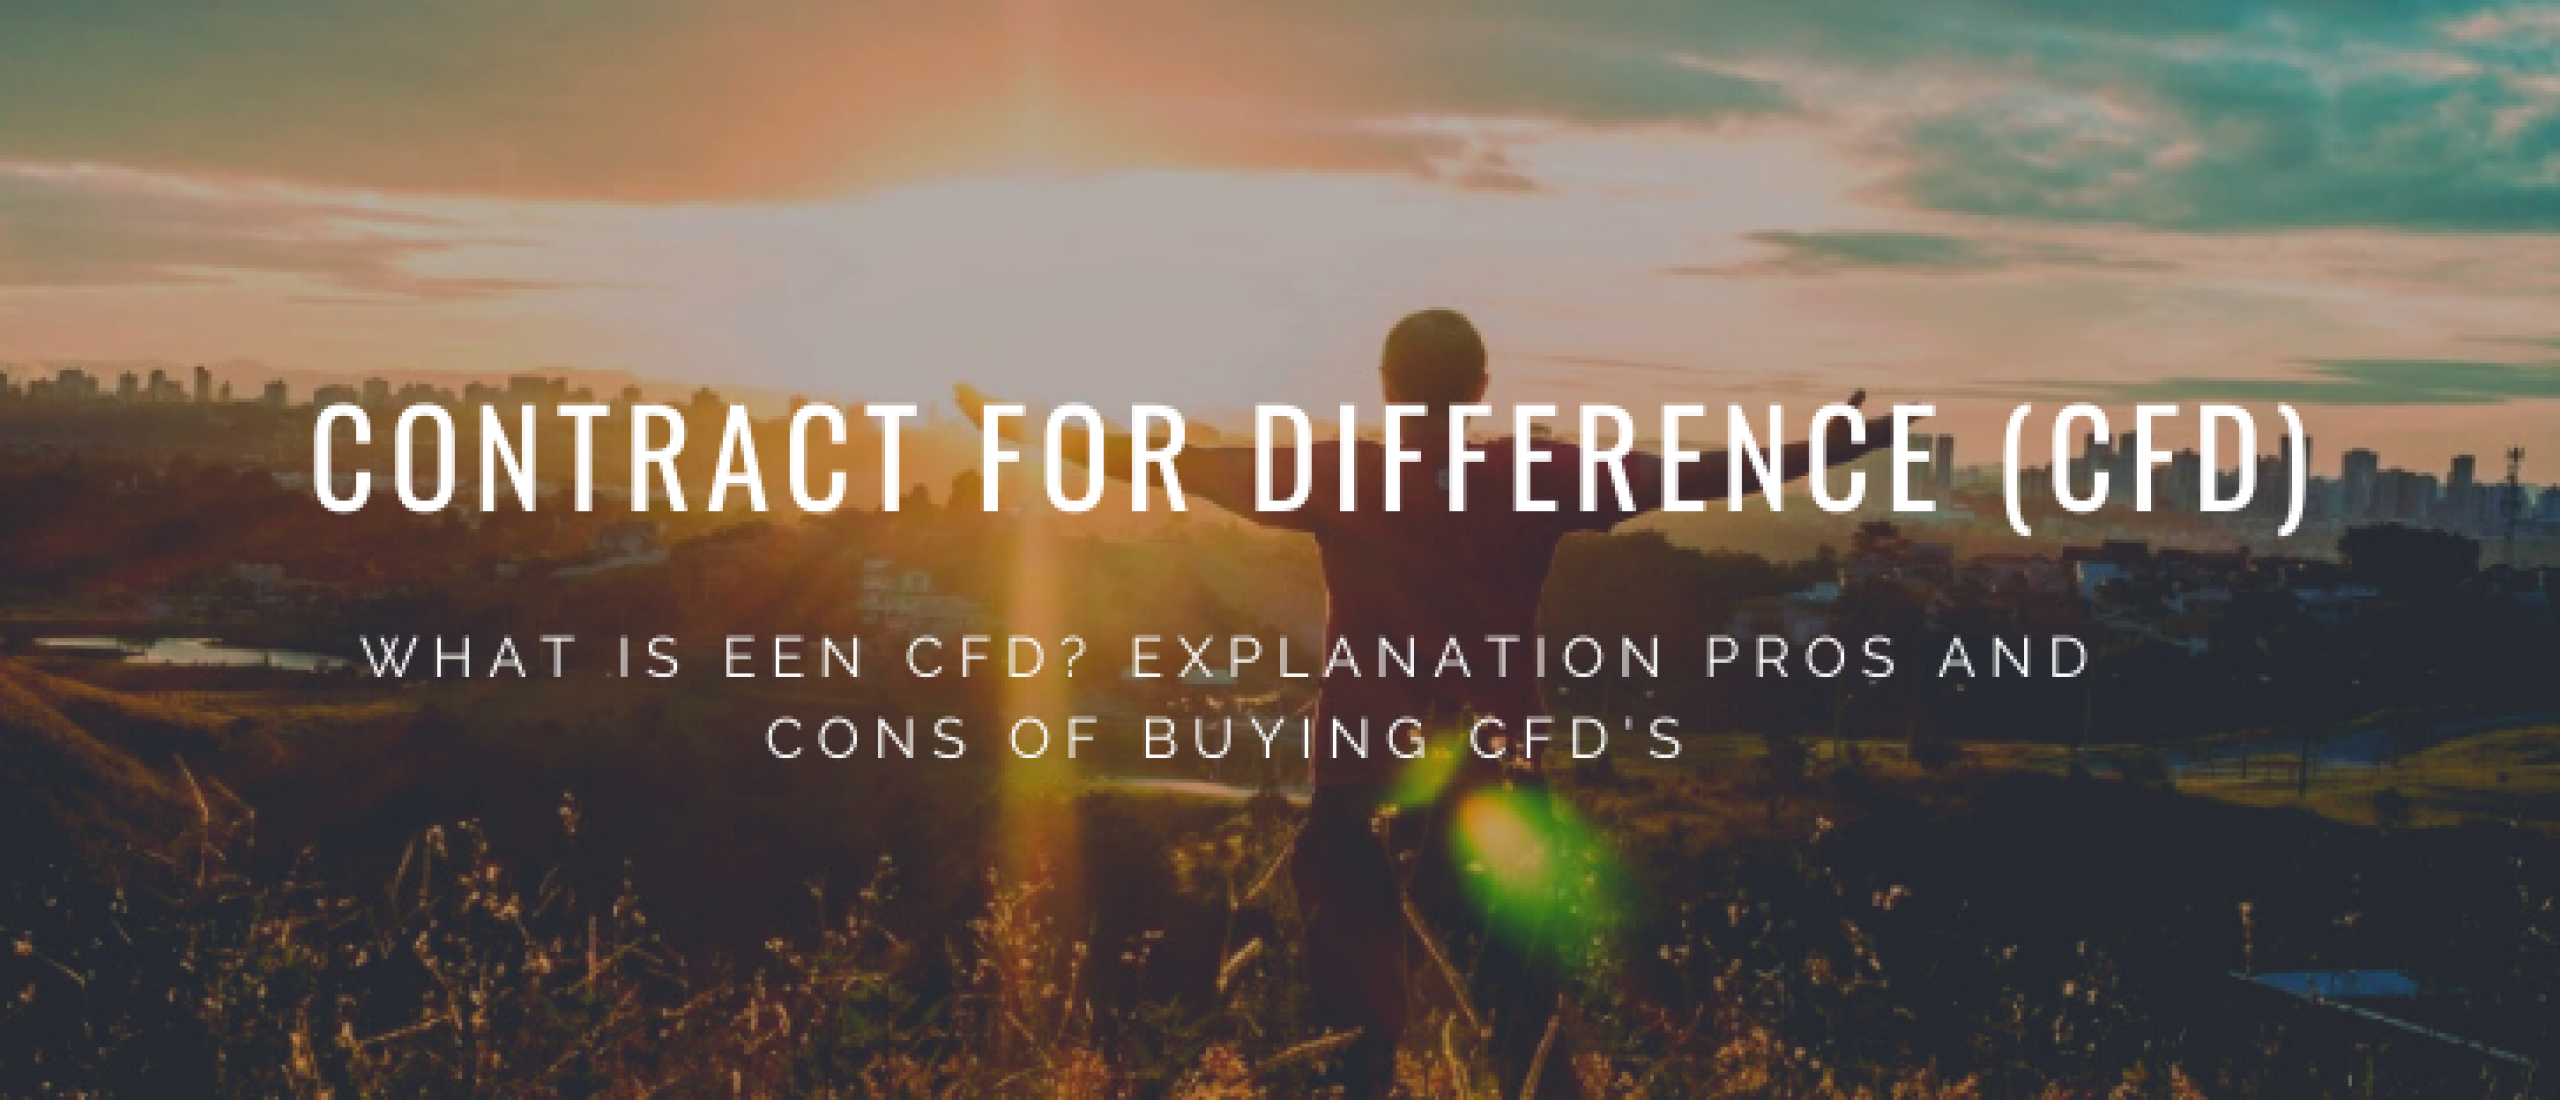 What is a CFD (Contract for Difference)? | Happy Investors